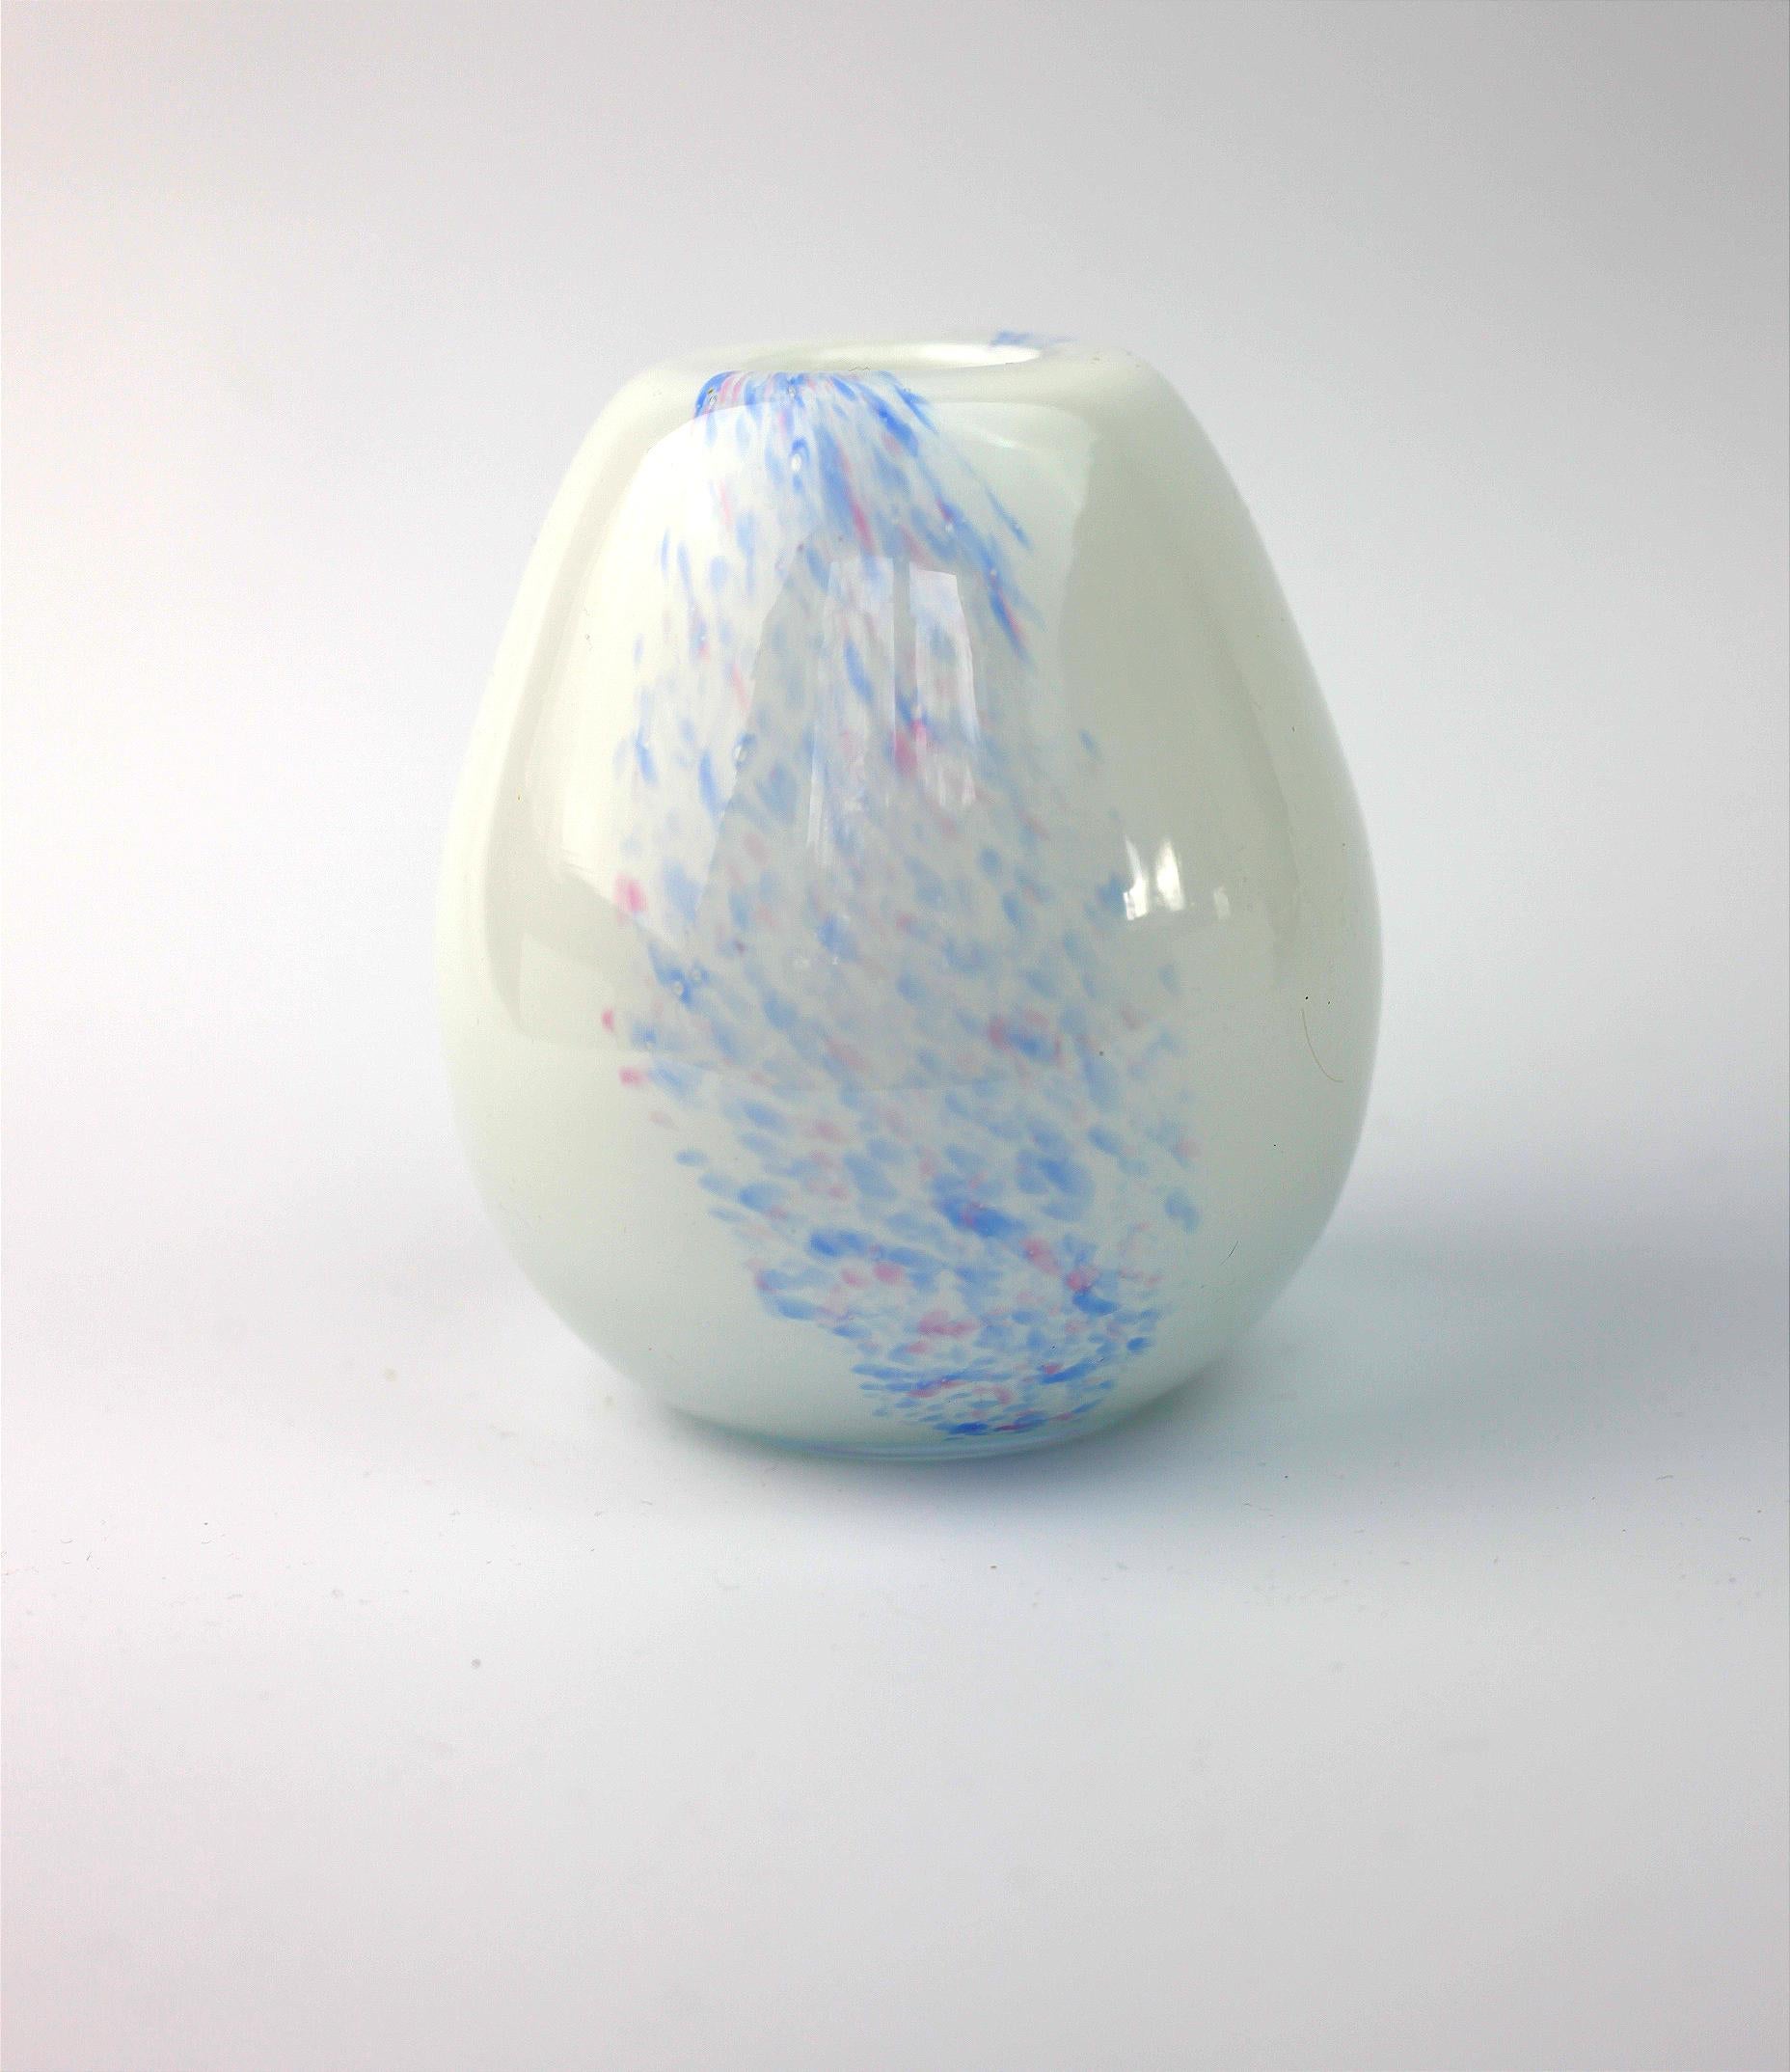 This Danish glass vase from the 'Reviera' series was designed by glassblower Kylle Svanlund and manufactured by Holmegaard in Denmark in 1976.